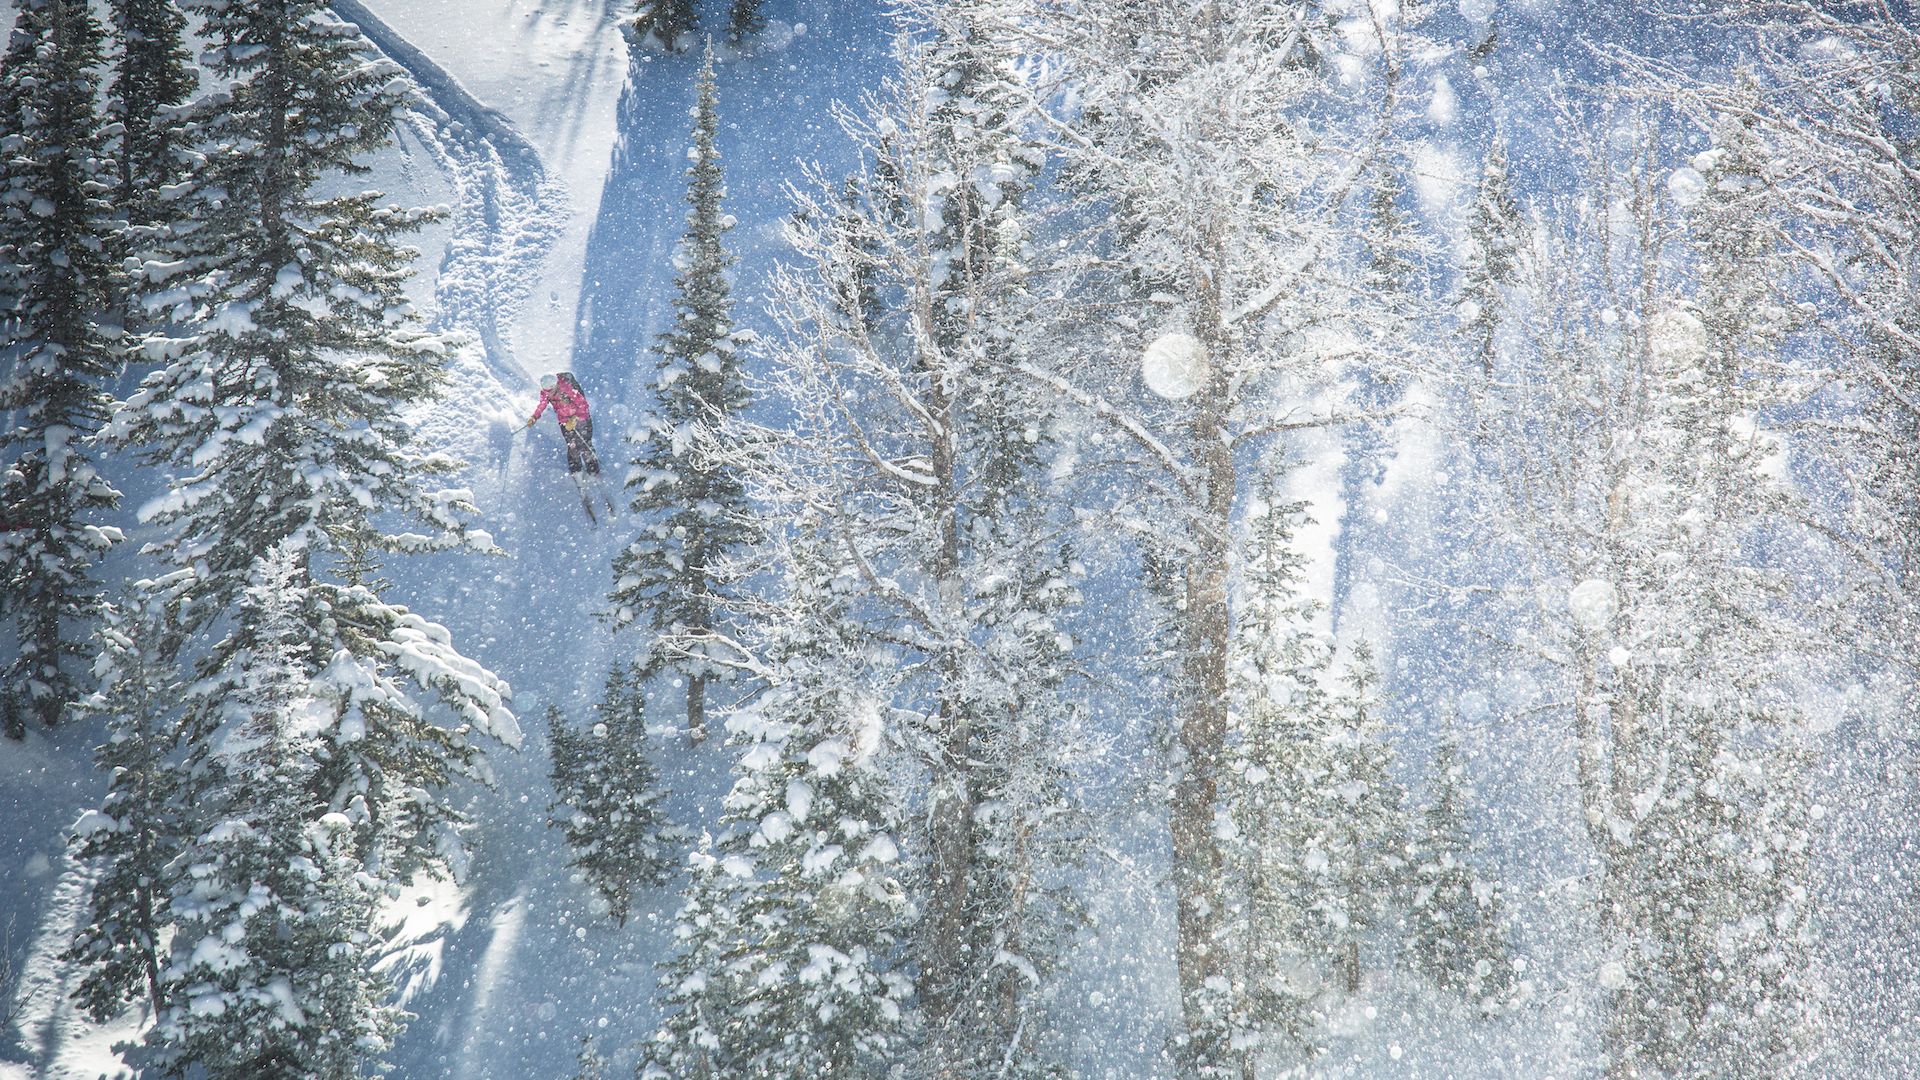 Mountain skiing and snowboarding in Jackson Hole, WY